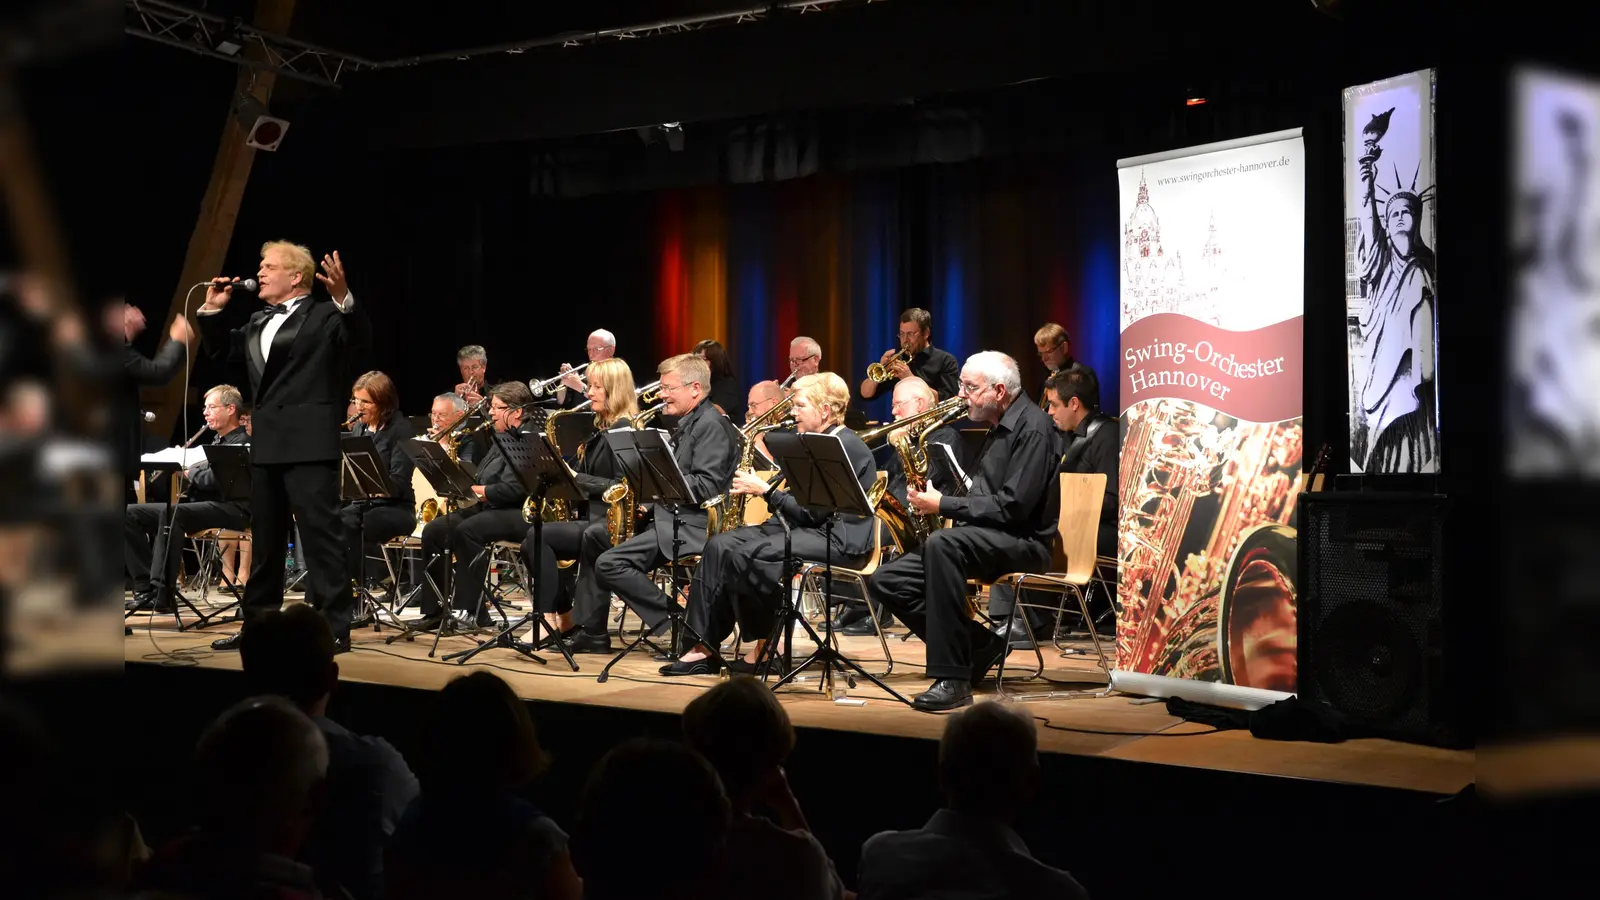 Das Swing-Orchester Hannover. (Foto: privat)